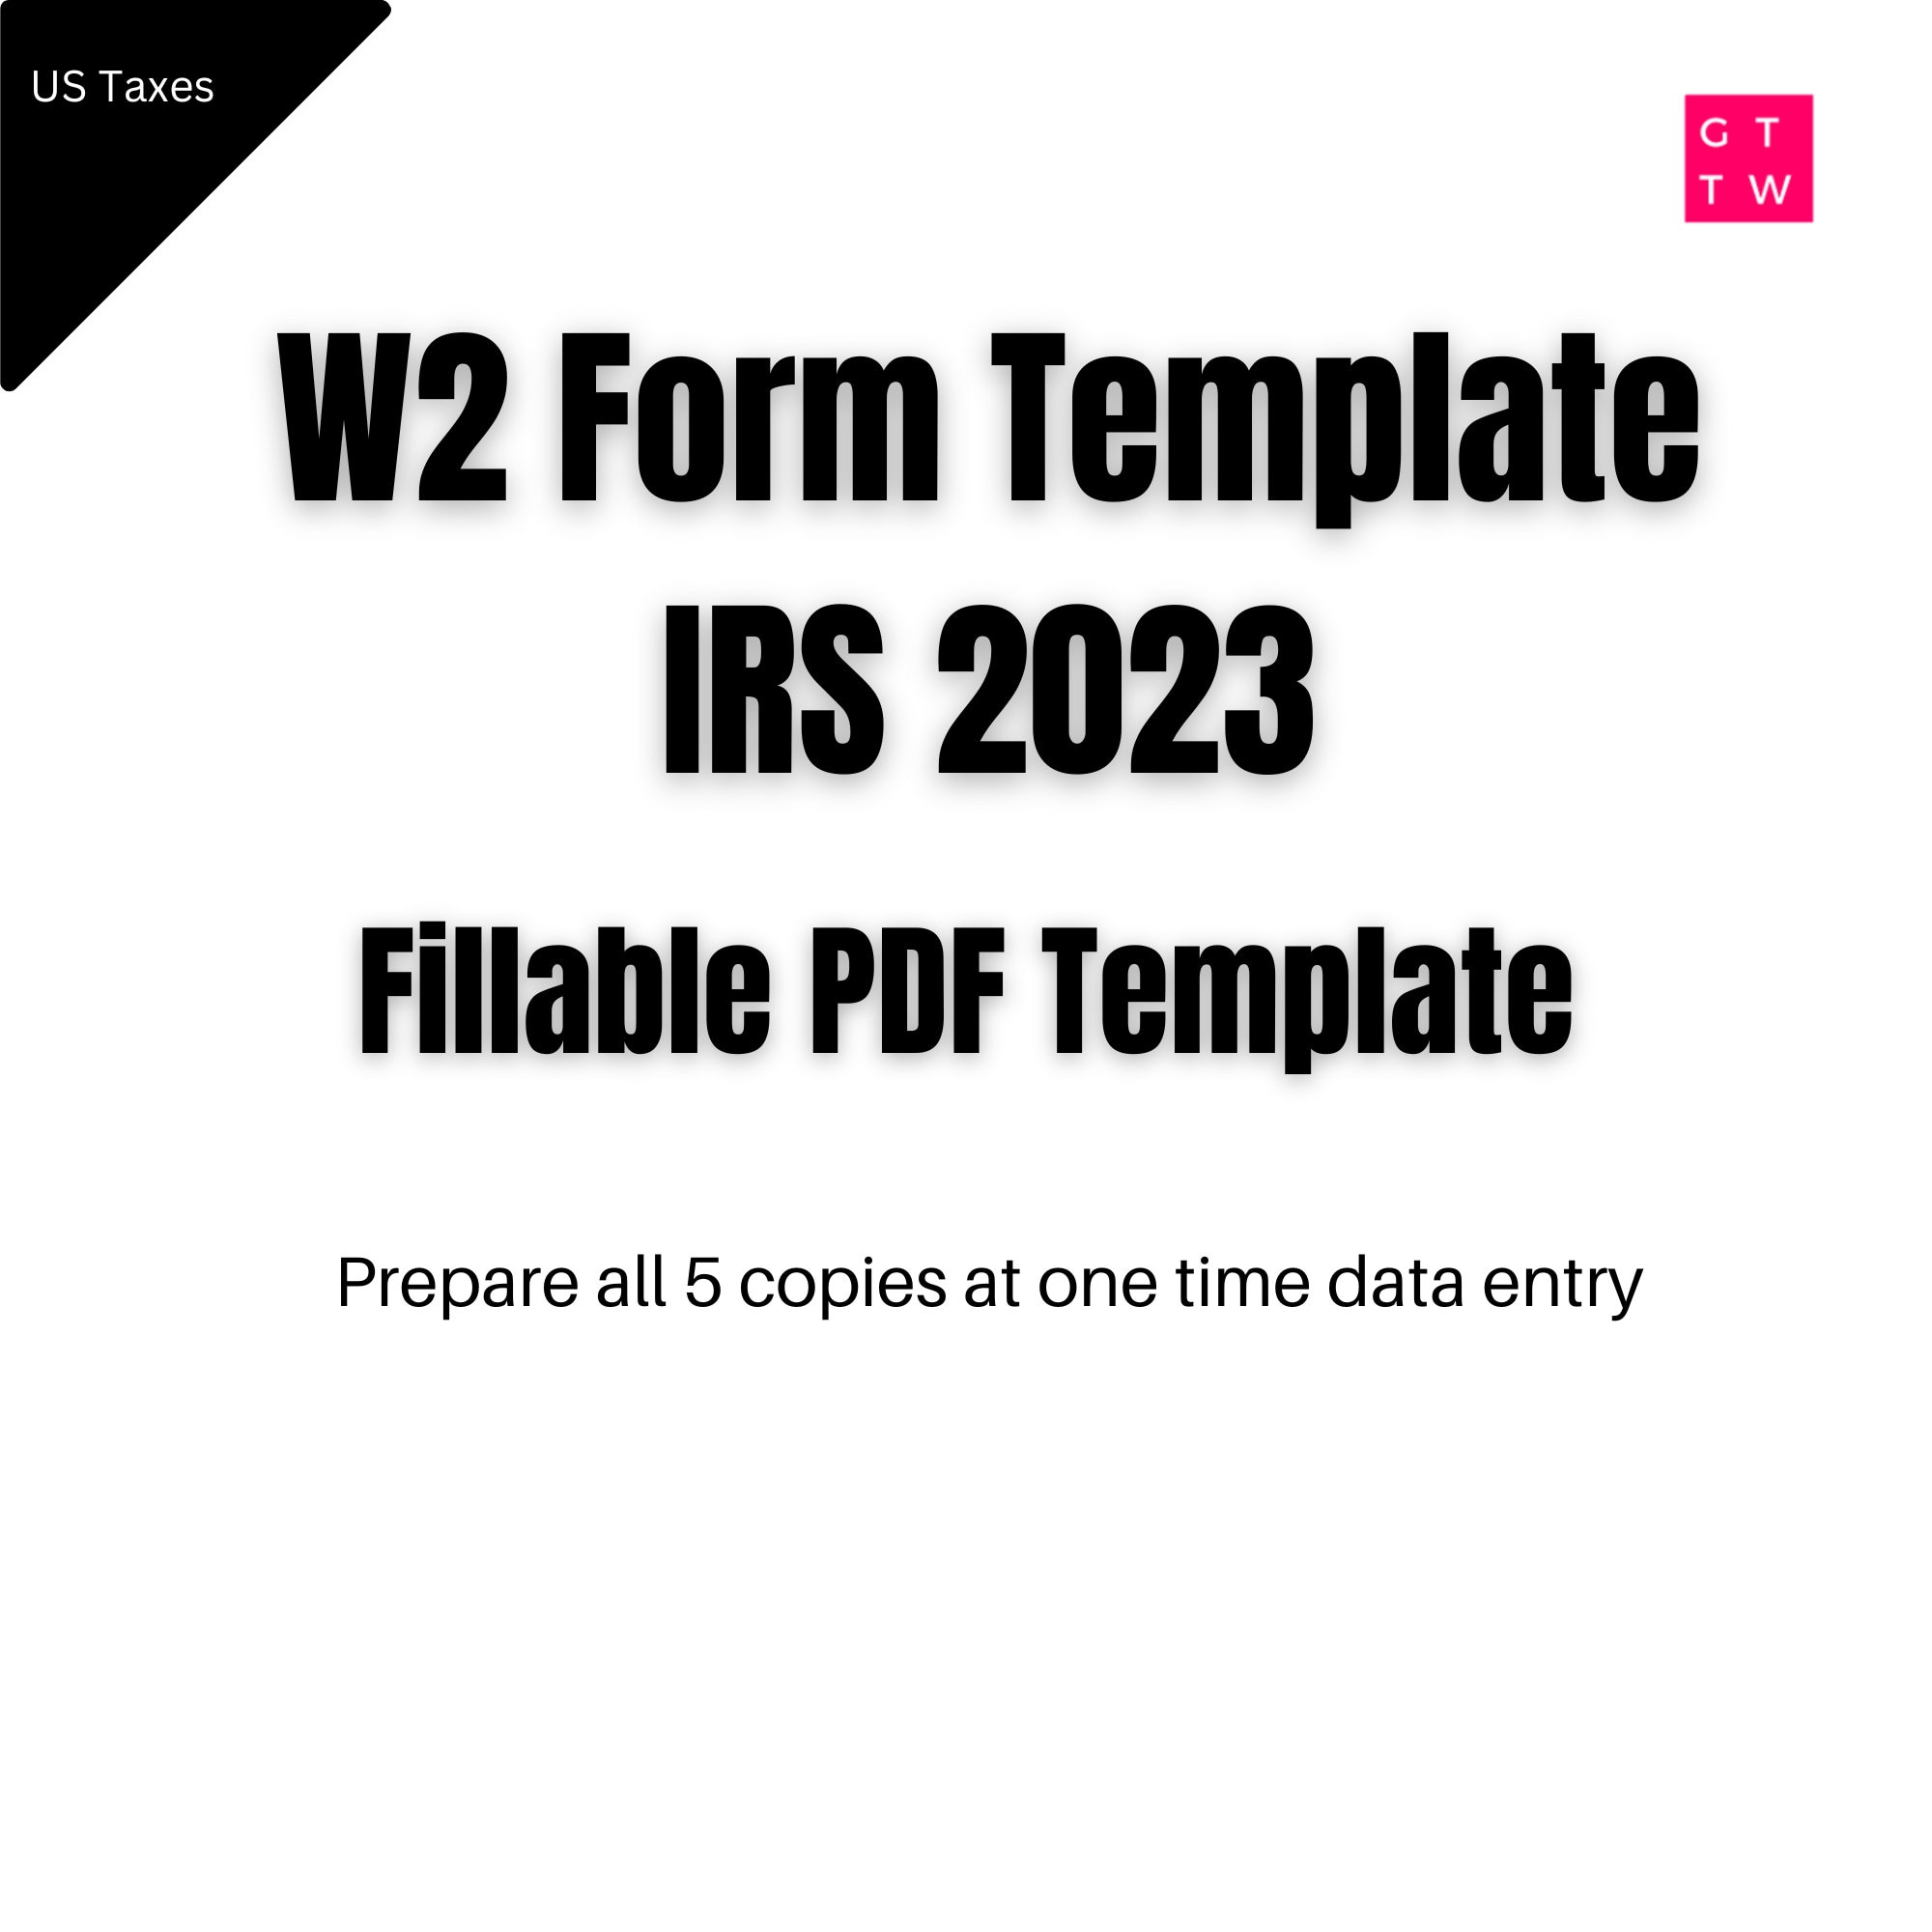 W2 Form IRS 2023 Fillable PDF With Print and Clear Buttons Generate W2